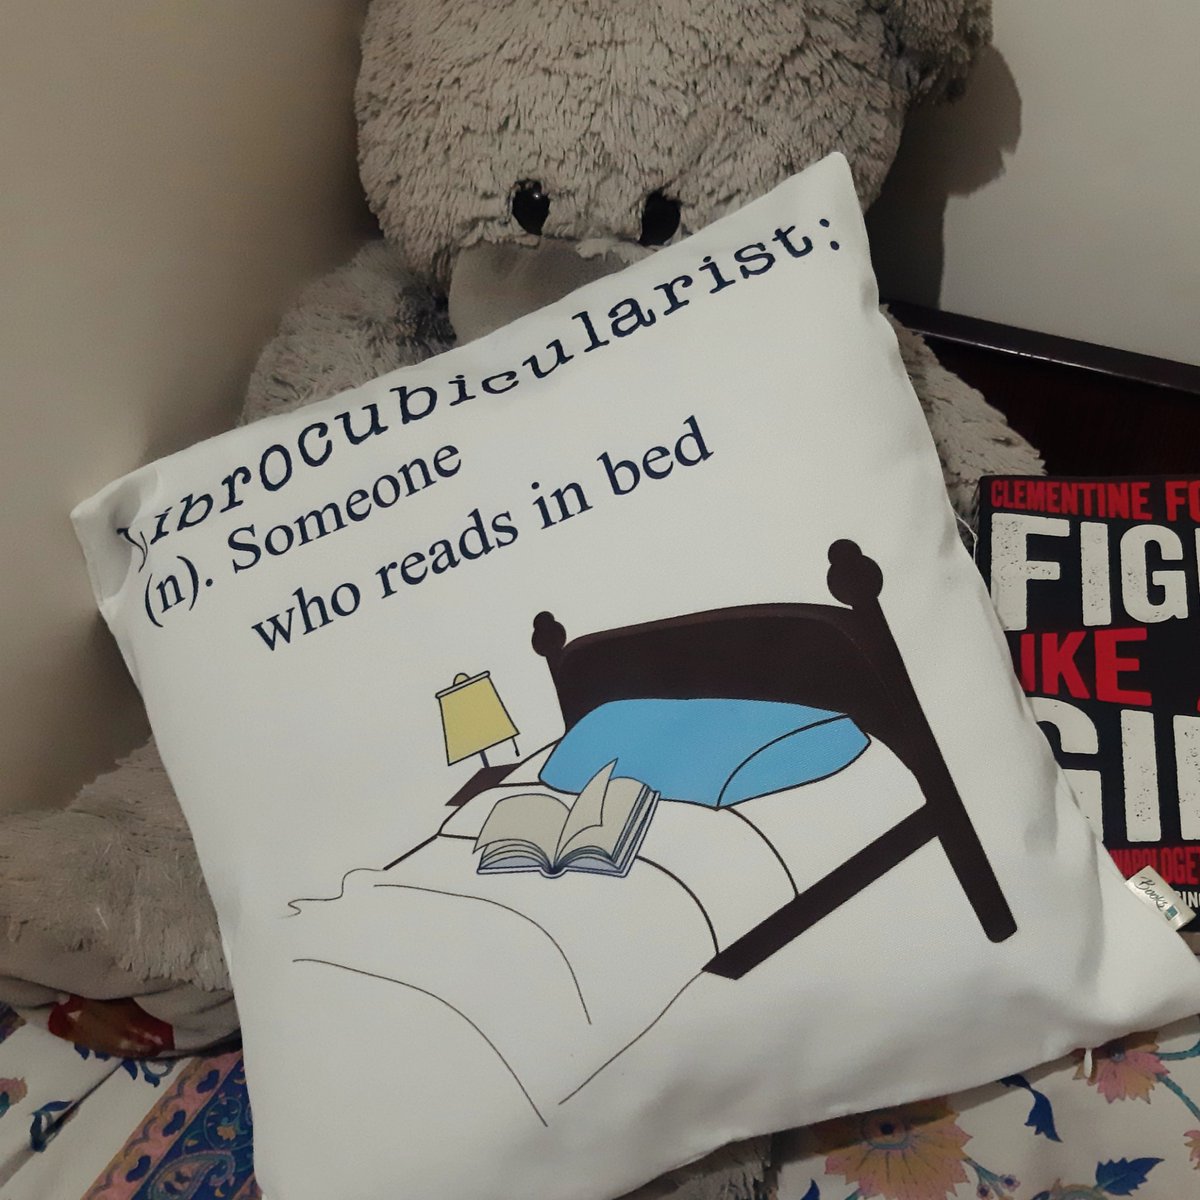 'Book lovers never go to bed alone.' Agree?

Shop here - bit.ly/2ZzoiVs

#bibliophile #literarygifts #giftingideas #giftsforbooklovers #cushioncovers #sleeping #readingtime